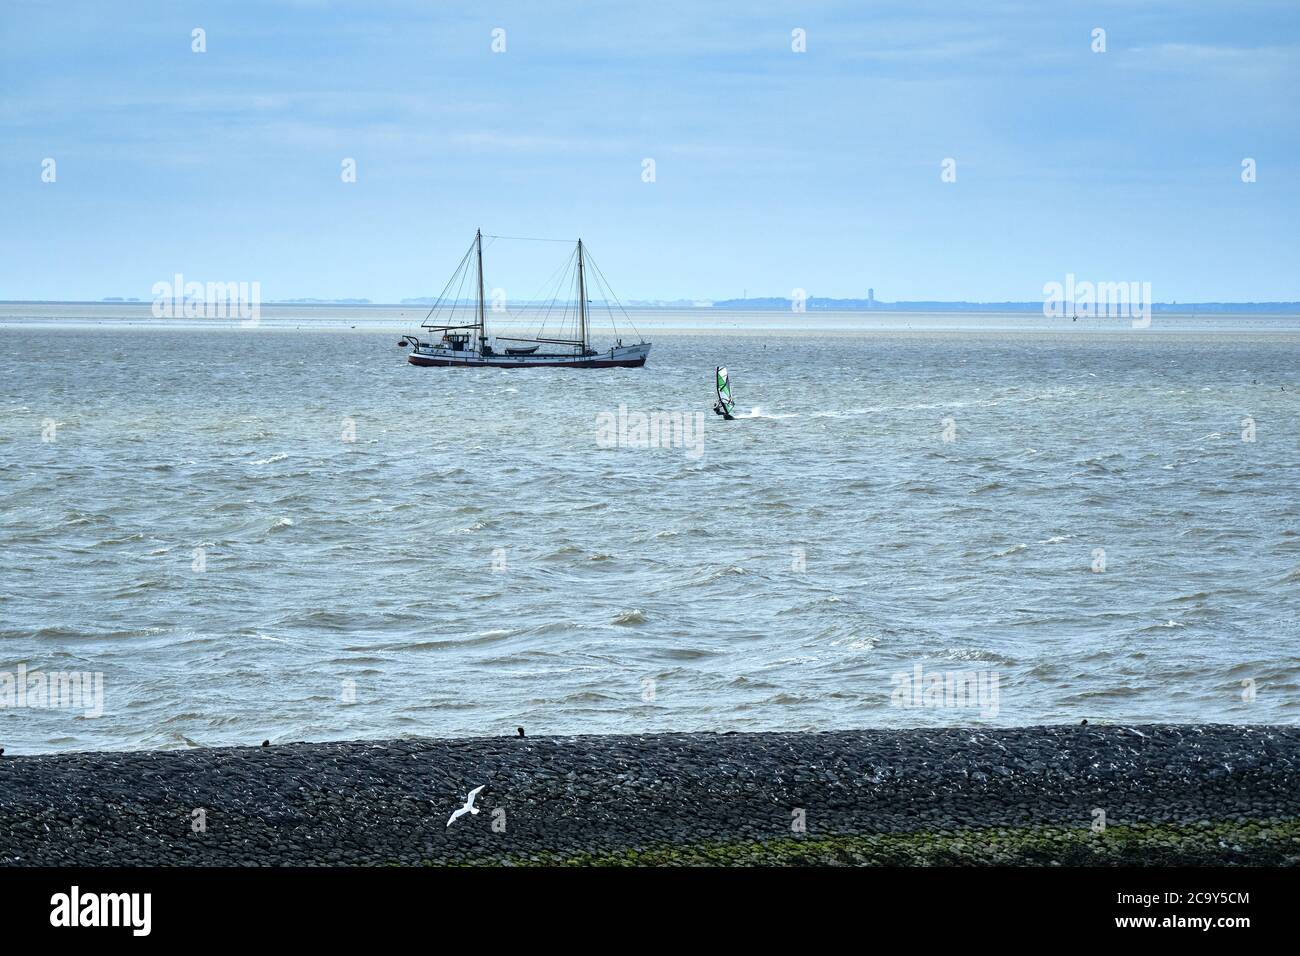 Harlingen,the Netherlands,July 23,2020:Wadden sea with windsurfer and old traditional sailing ship, black stone dike, pier and on the horizon the Stock Photo